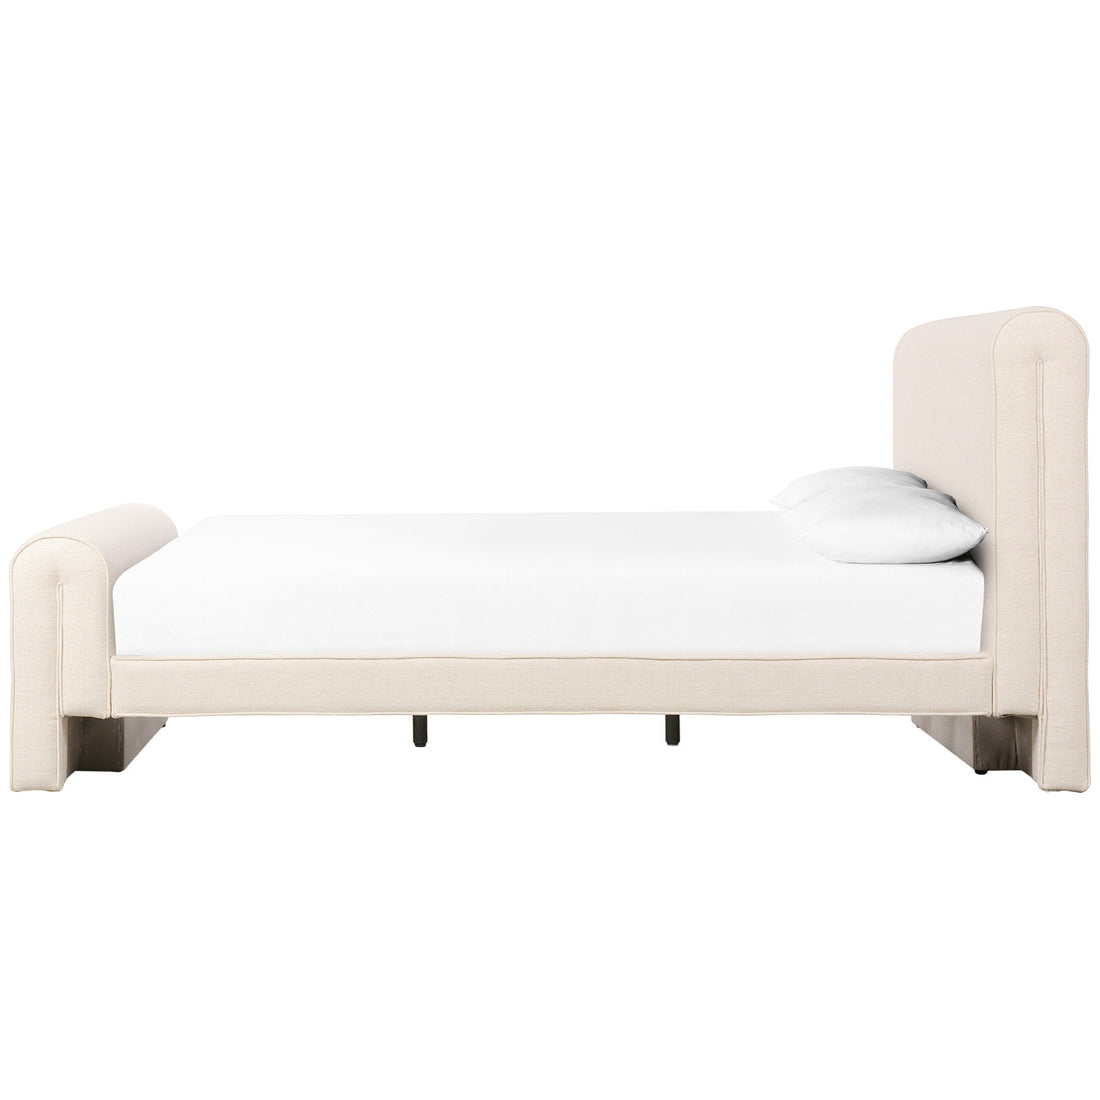 Four Hands Norwood Mitchell Bed - Thames Cream